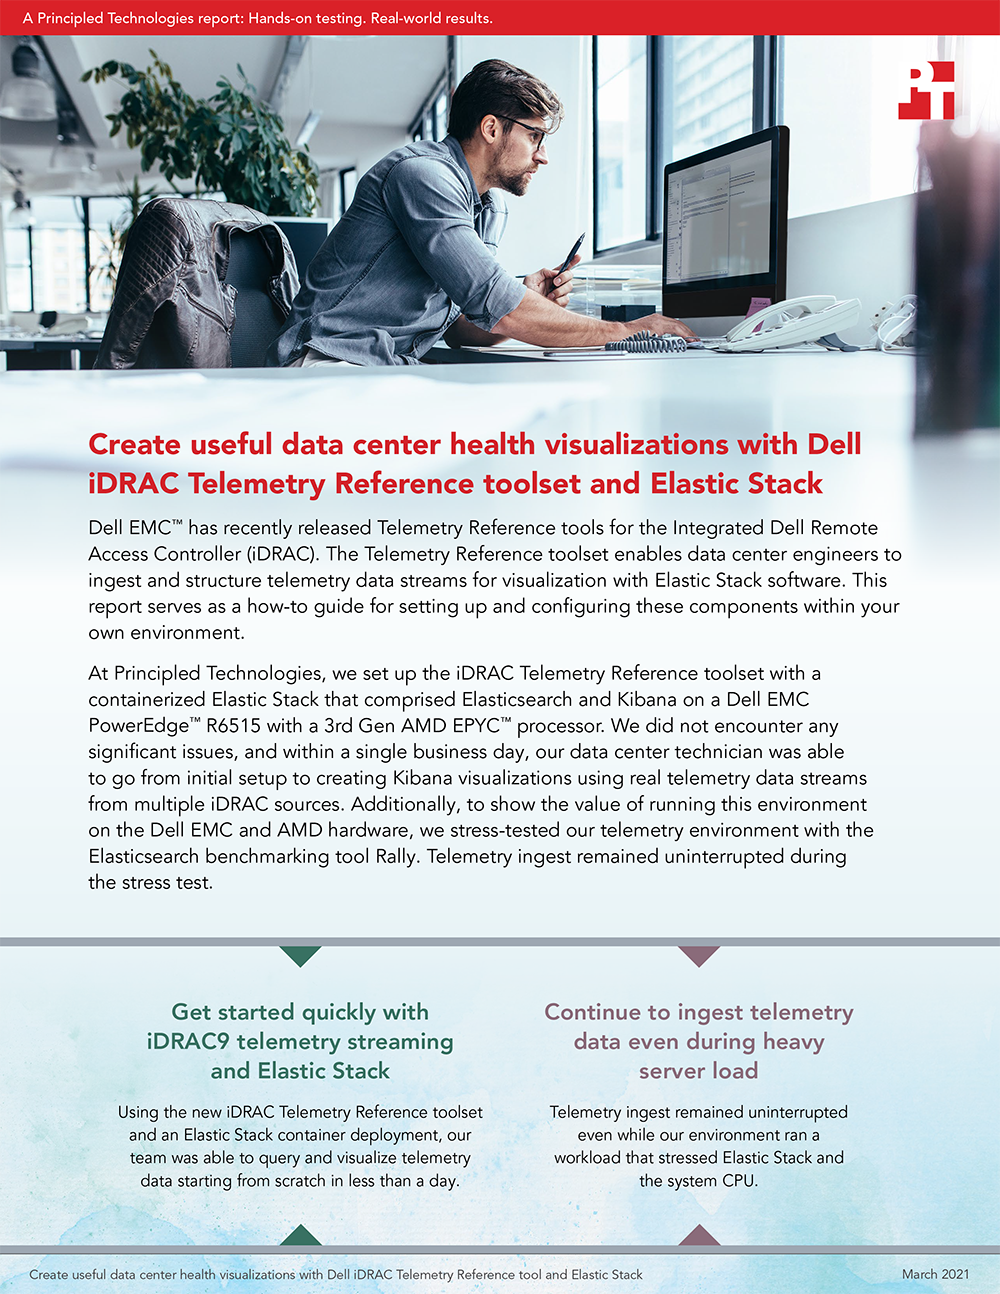 Principled Technologies' Setup Guide Shows How to Use the New Dell iDRAC9 Telemetry Reference Toolset with Elastic Stack